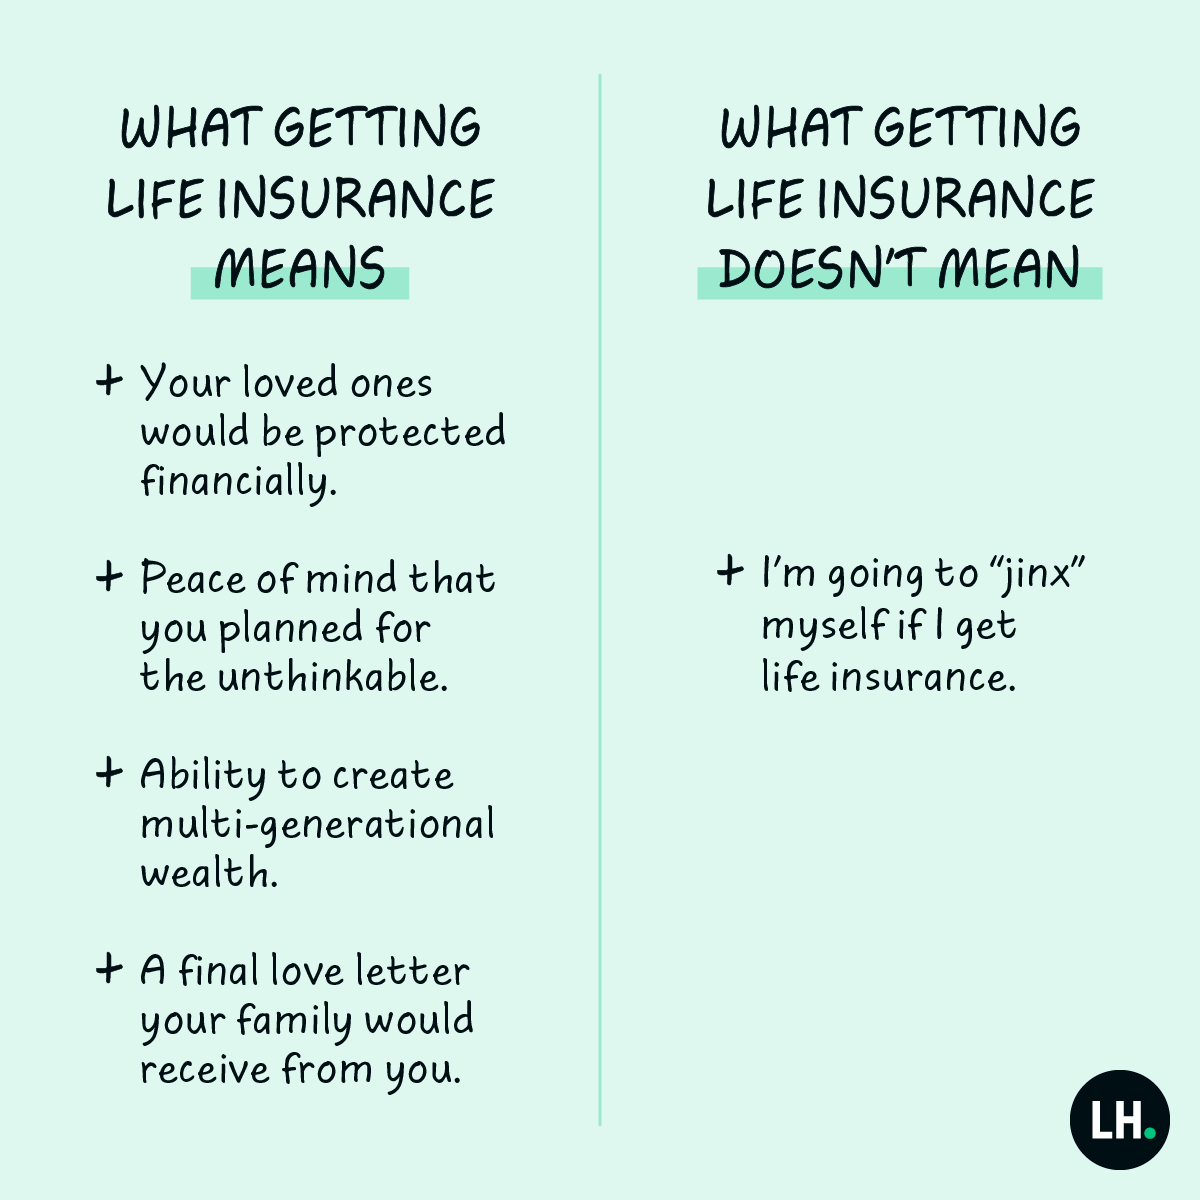 As you can see, there are many reasons to consider life insurance. The good news is that getting life insurance is simpler and more affordable than most people think. #GetLifeInsurance #independentagent #eriefamilylife #lifeinsurance #termlifeinsurance